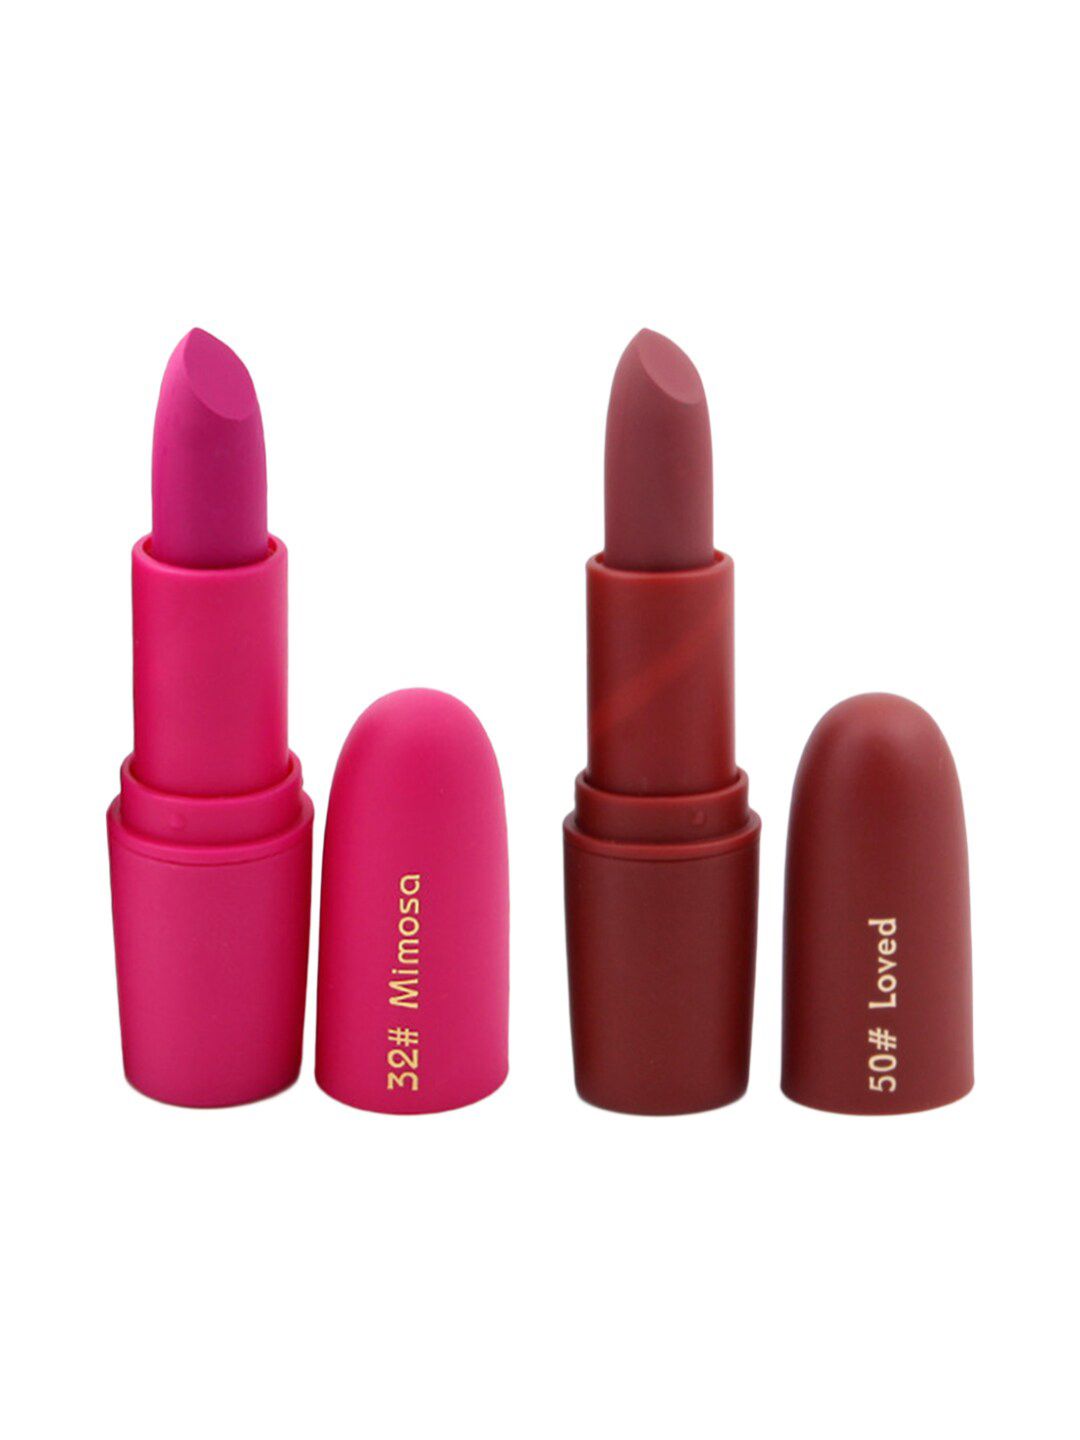 MISS ROSE Professional Make-Up Set of 2 Matte Creamy Lipsticks - Mimosa 32 & Loved 50 Price in India